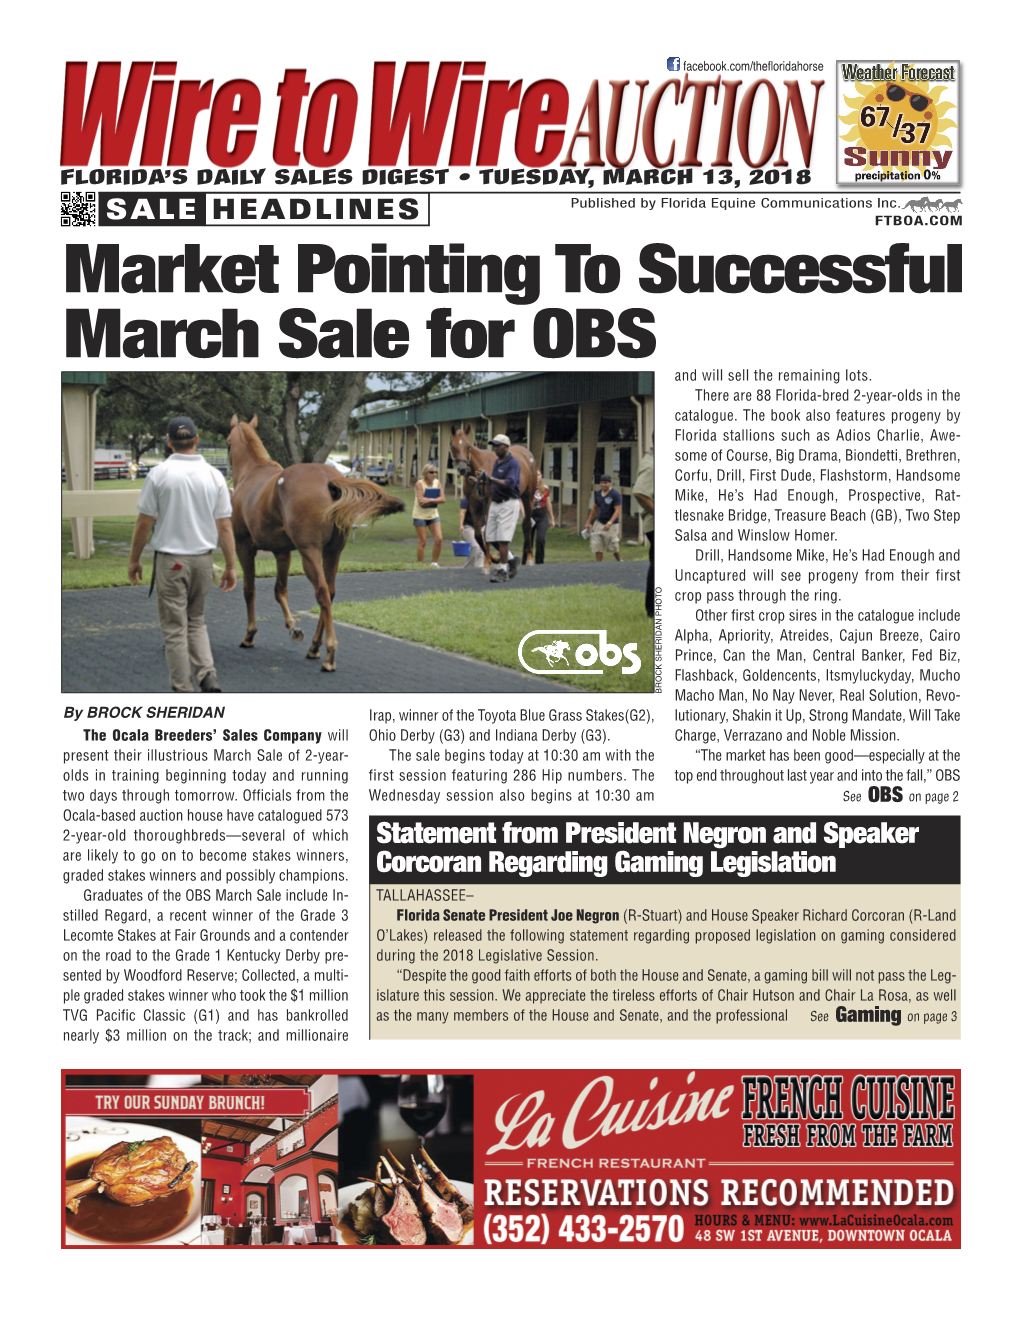 Market Pointing to Successful March Sale for OBS and Will Sell the Remaining Lots